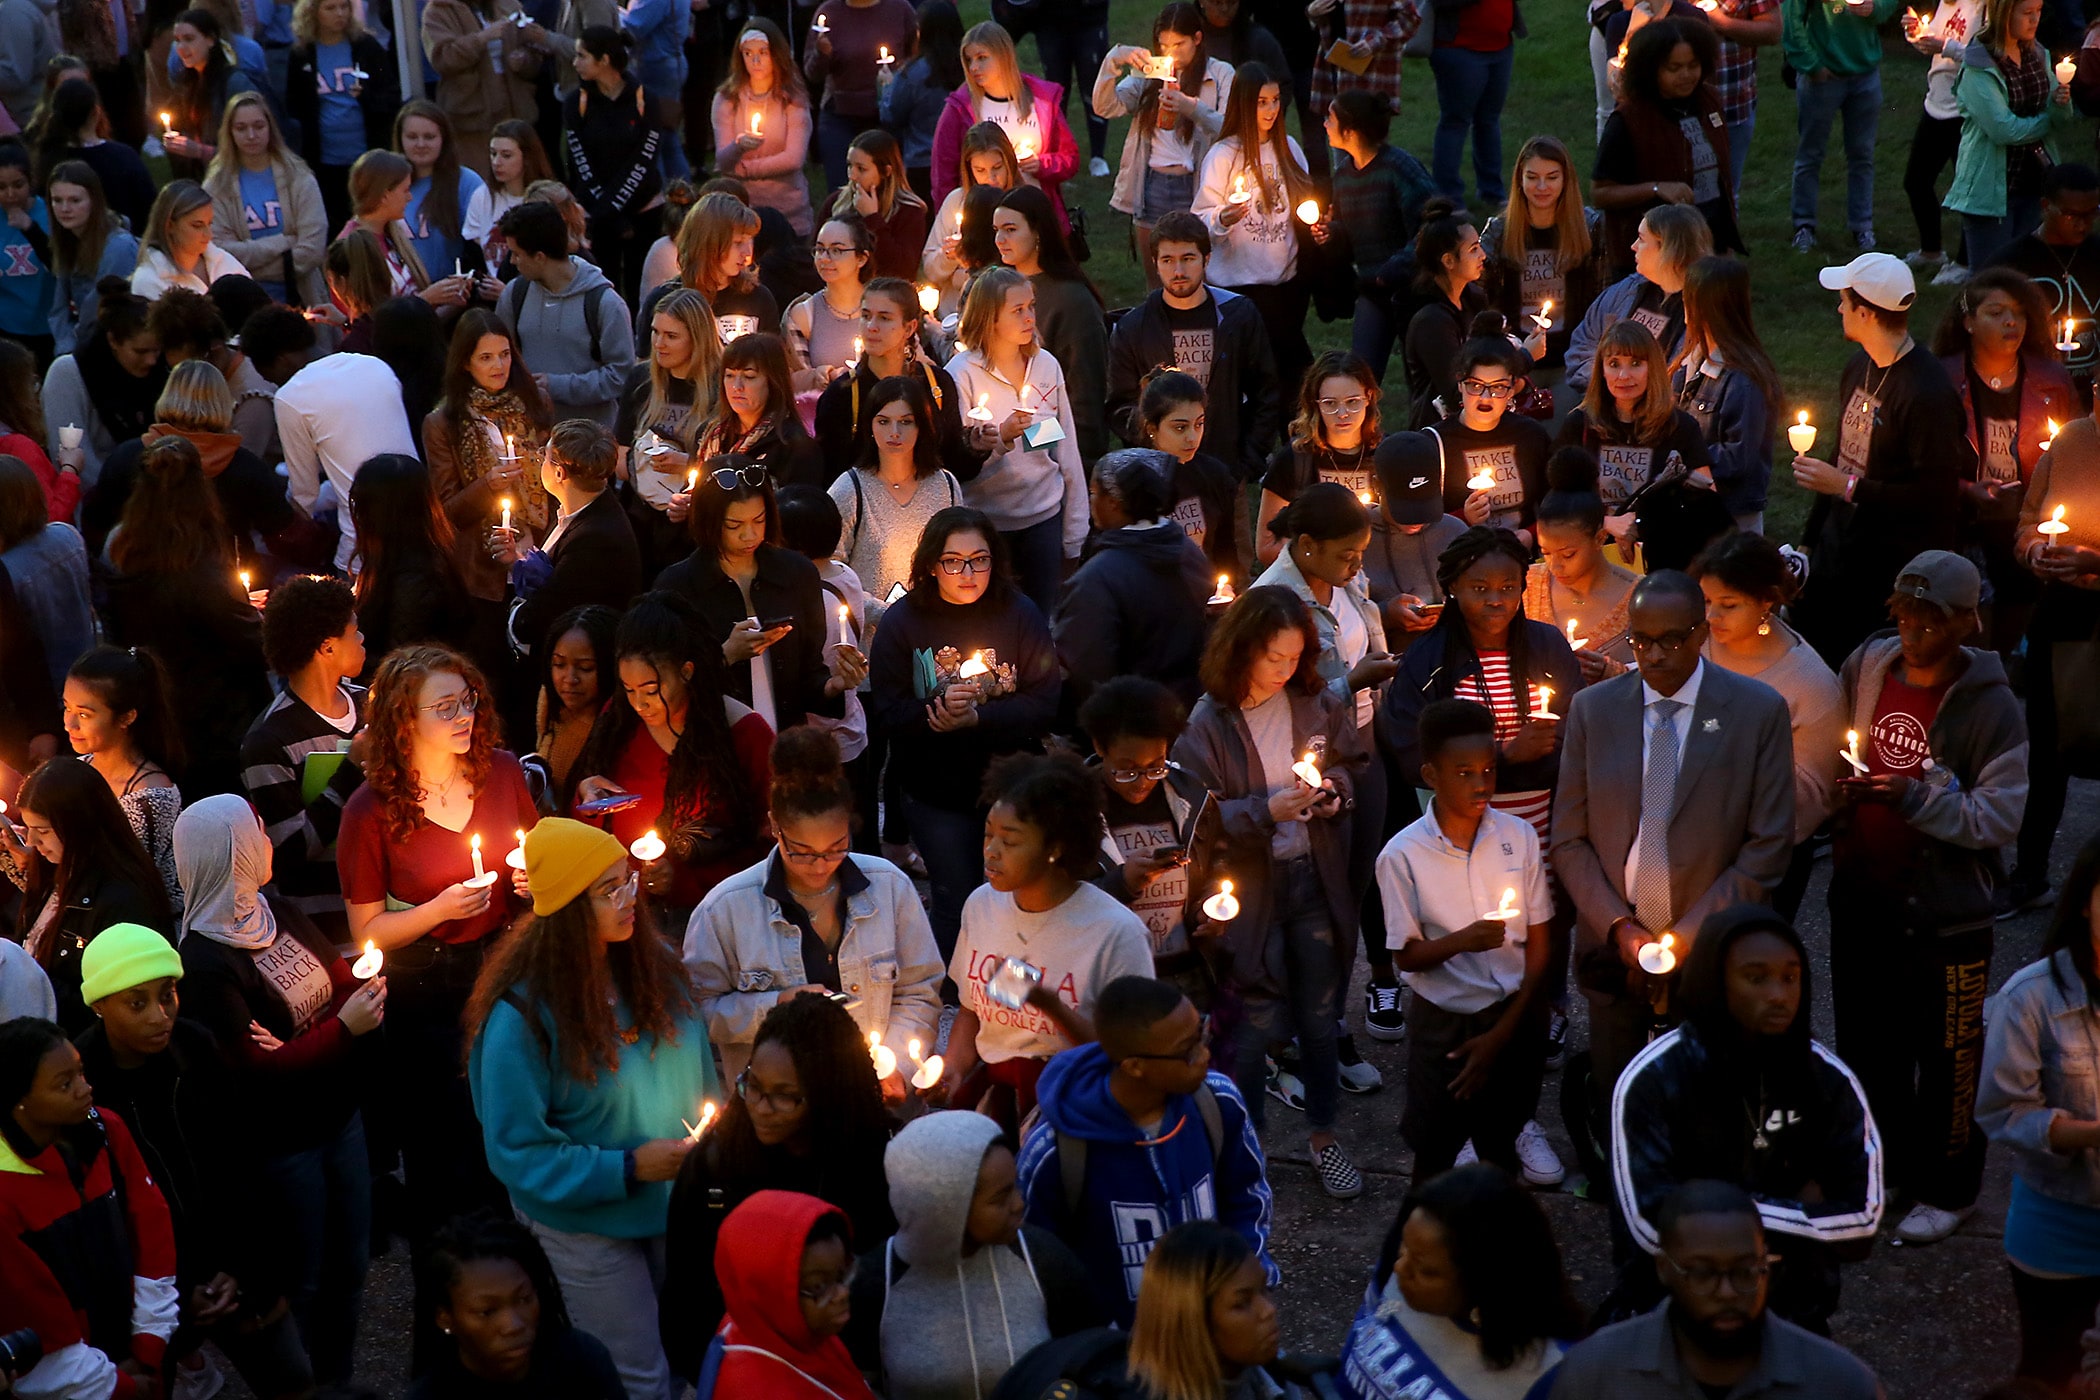 Hundreds of students, faculty members and staff from Tulane, Loyola, SUNO, Xavier, Dillard and UNO hold candles as they gather in the horseshoe at Loyola University for the 28th annual Take Back the Night Candlelight Vigil and March Against Sexual Violence on Thursday, October 24, 2019. (Photo by Michael DeMocker)